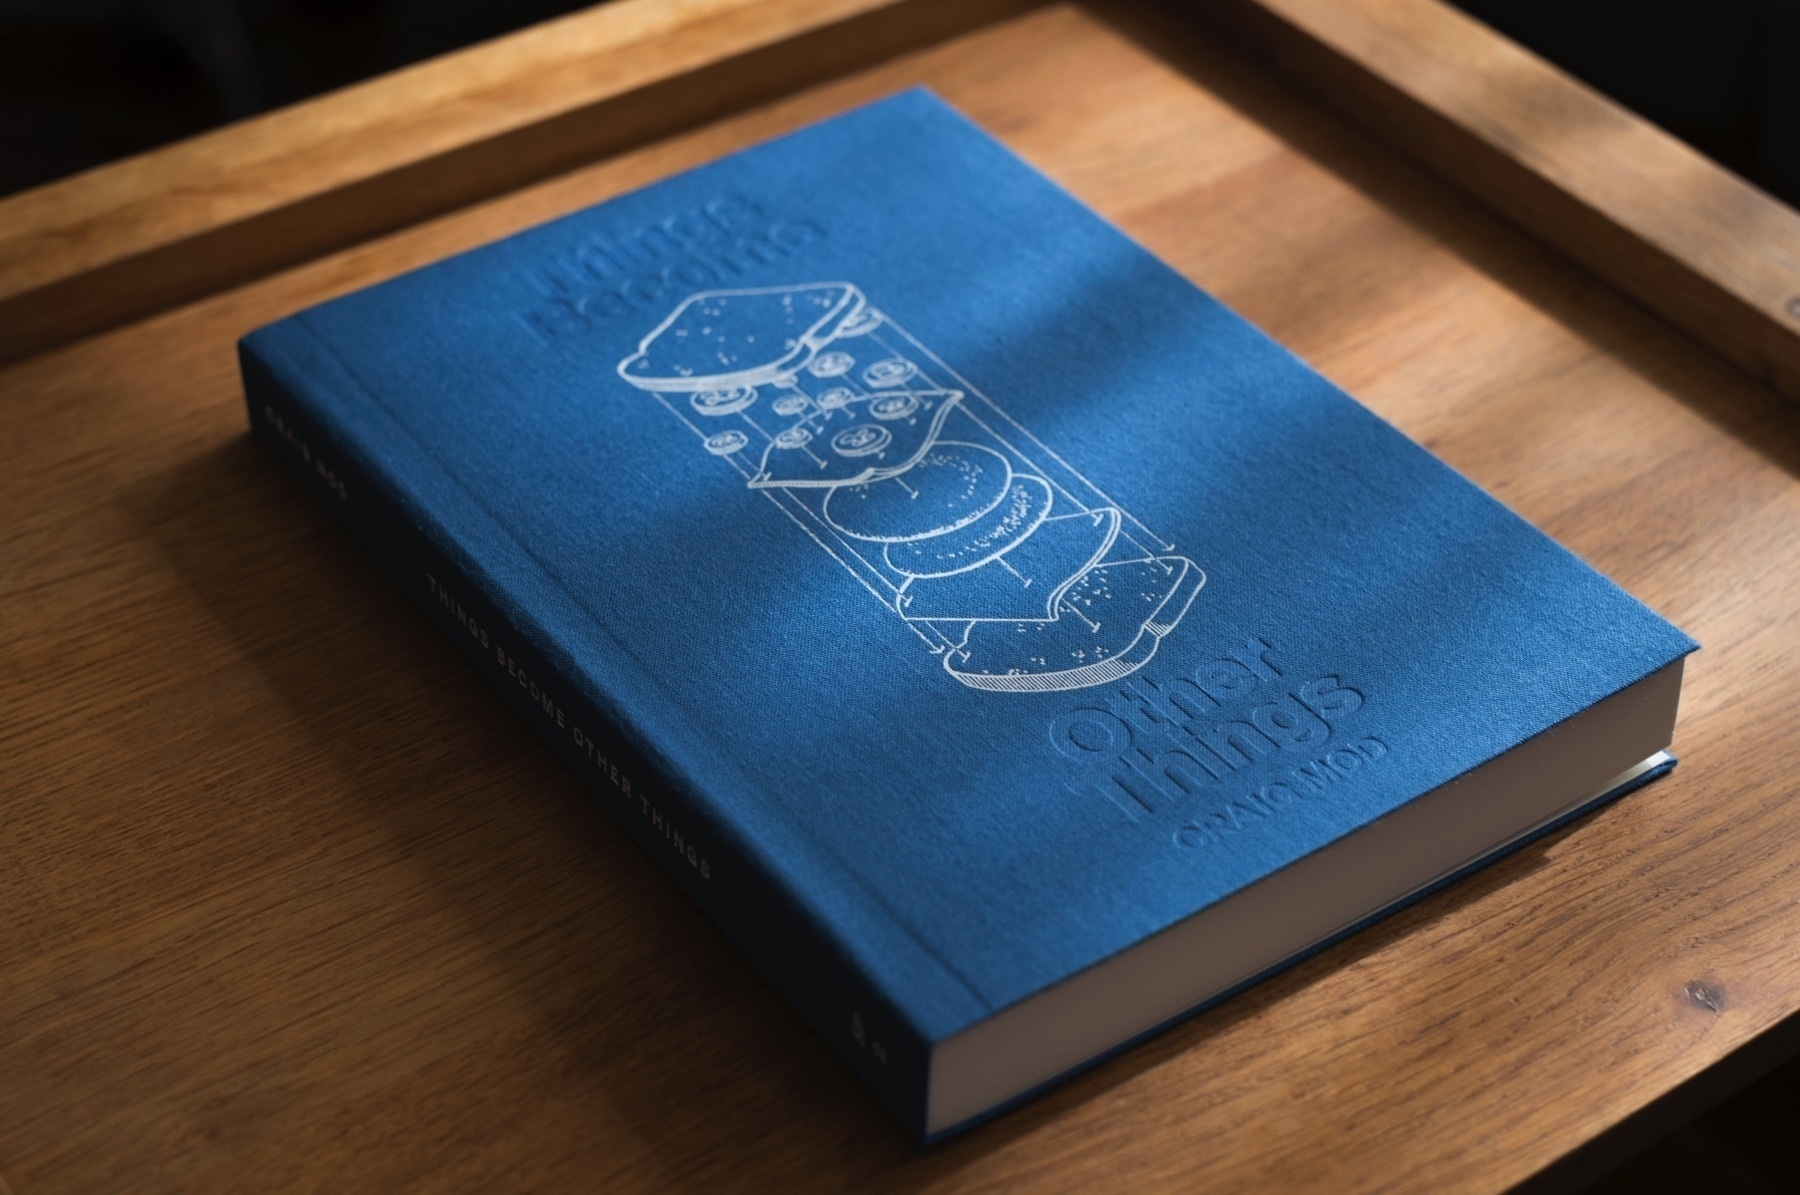 A beautiful blue book with a deconstructed sandwich on the cover